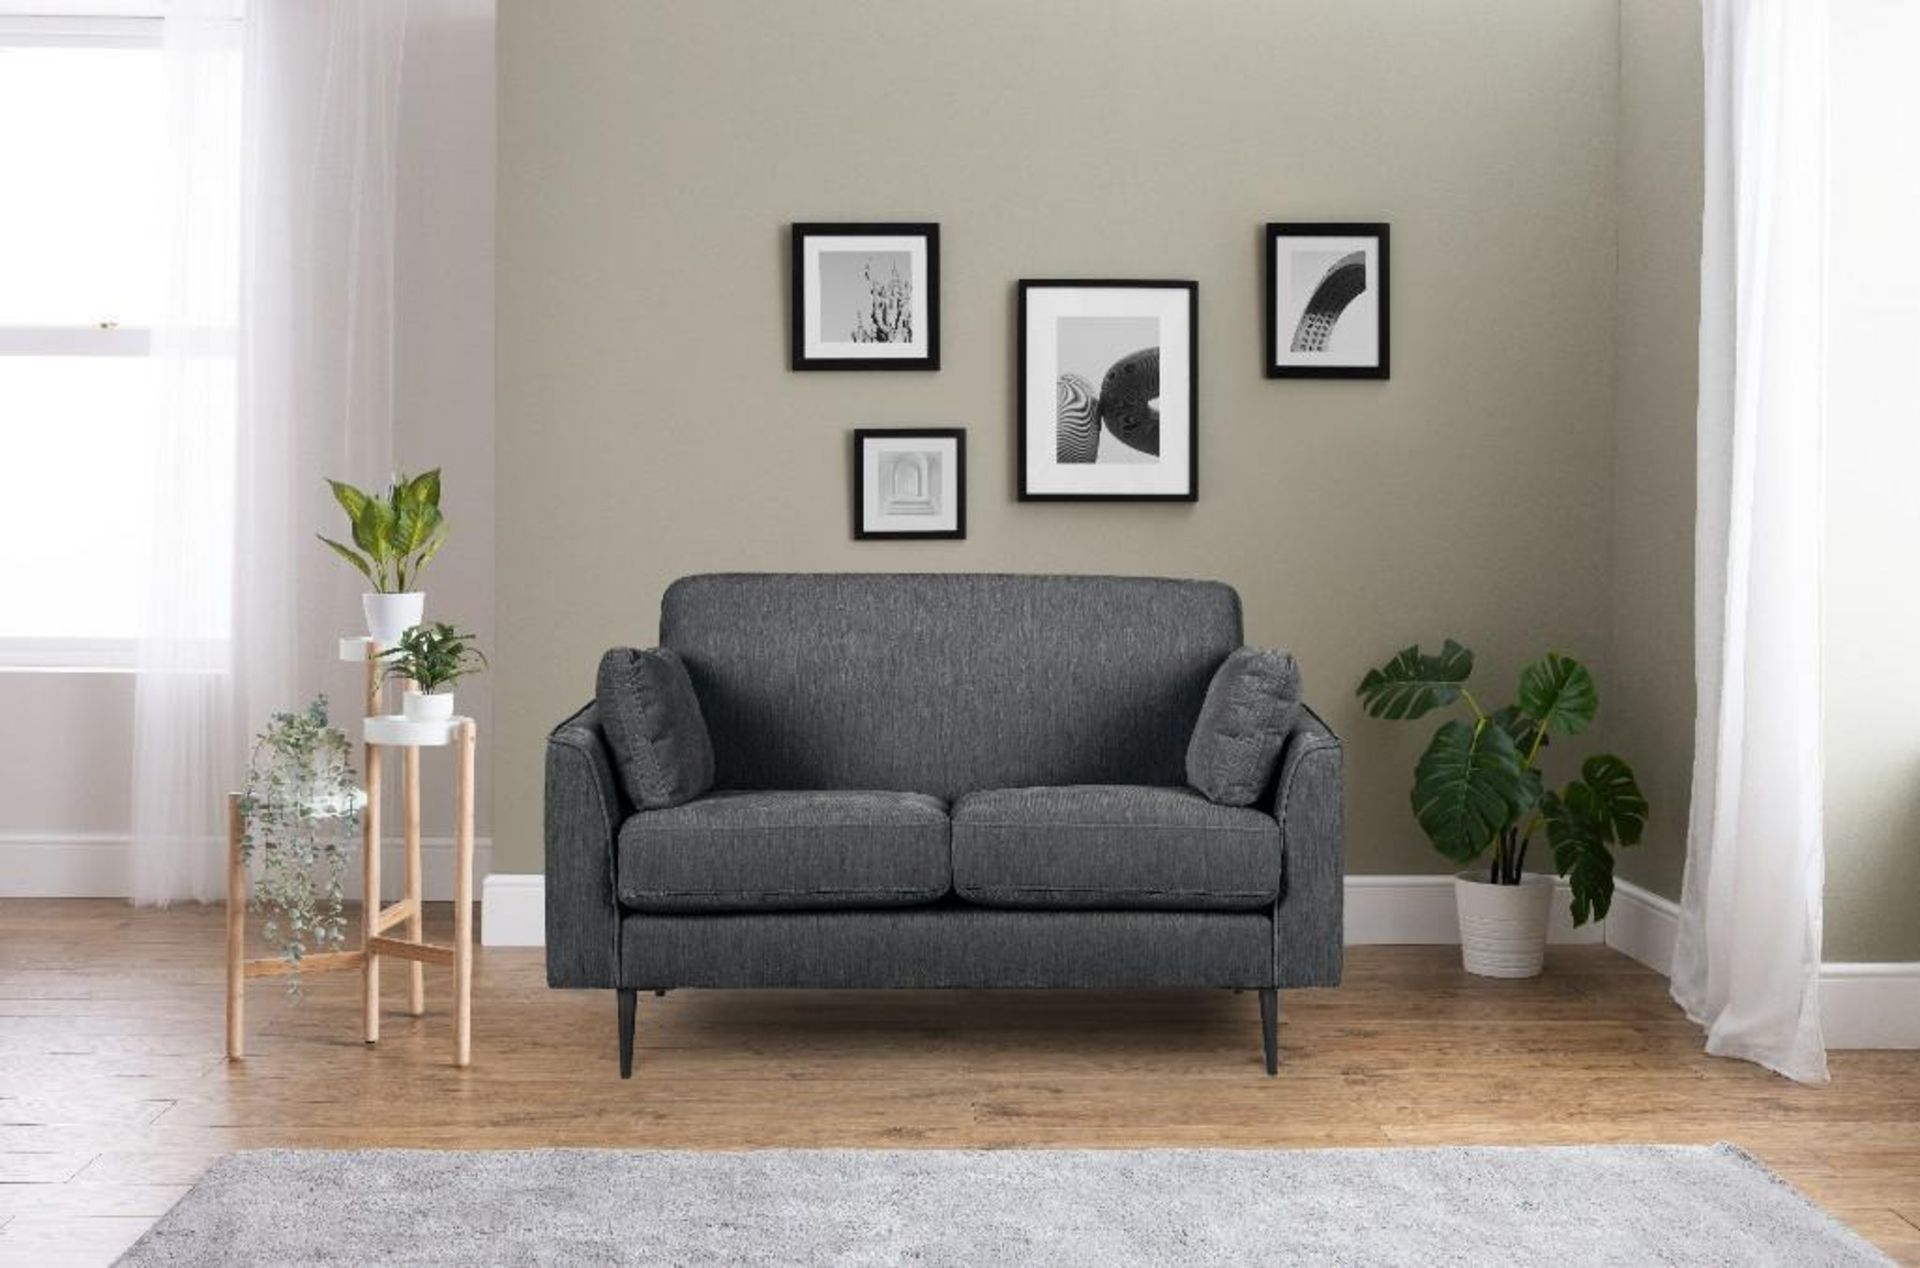 *TRADE LOT* 17 X Brand new Boxed Vista 2 seater sofa in Charcoal